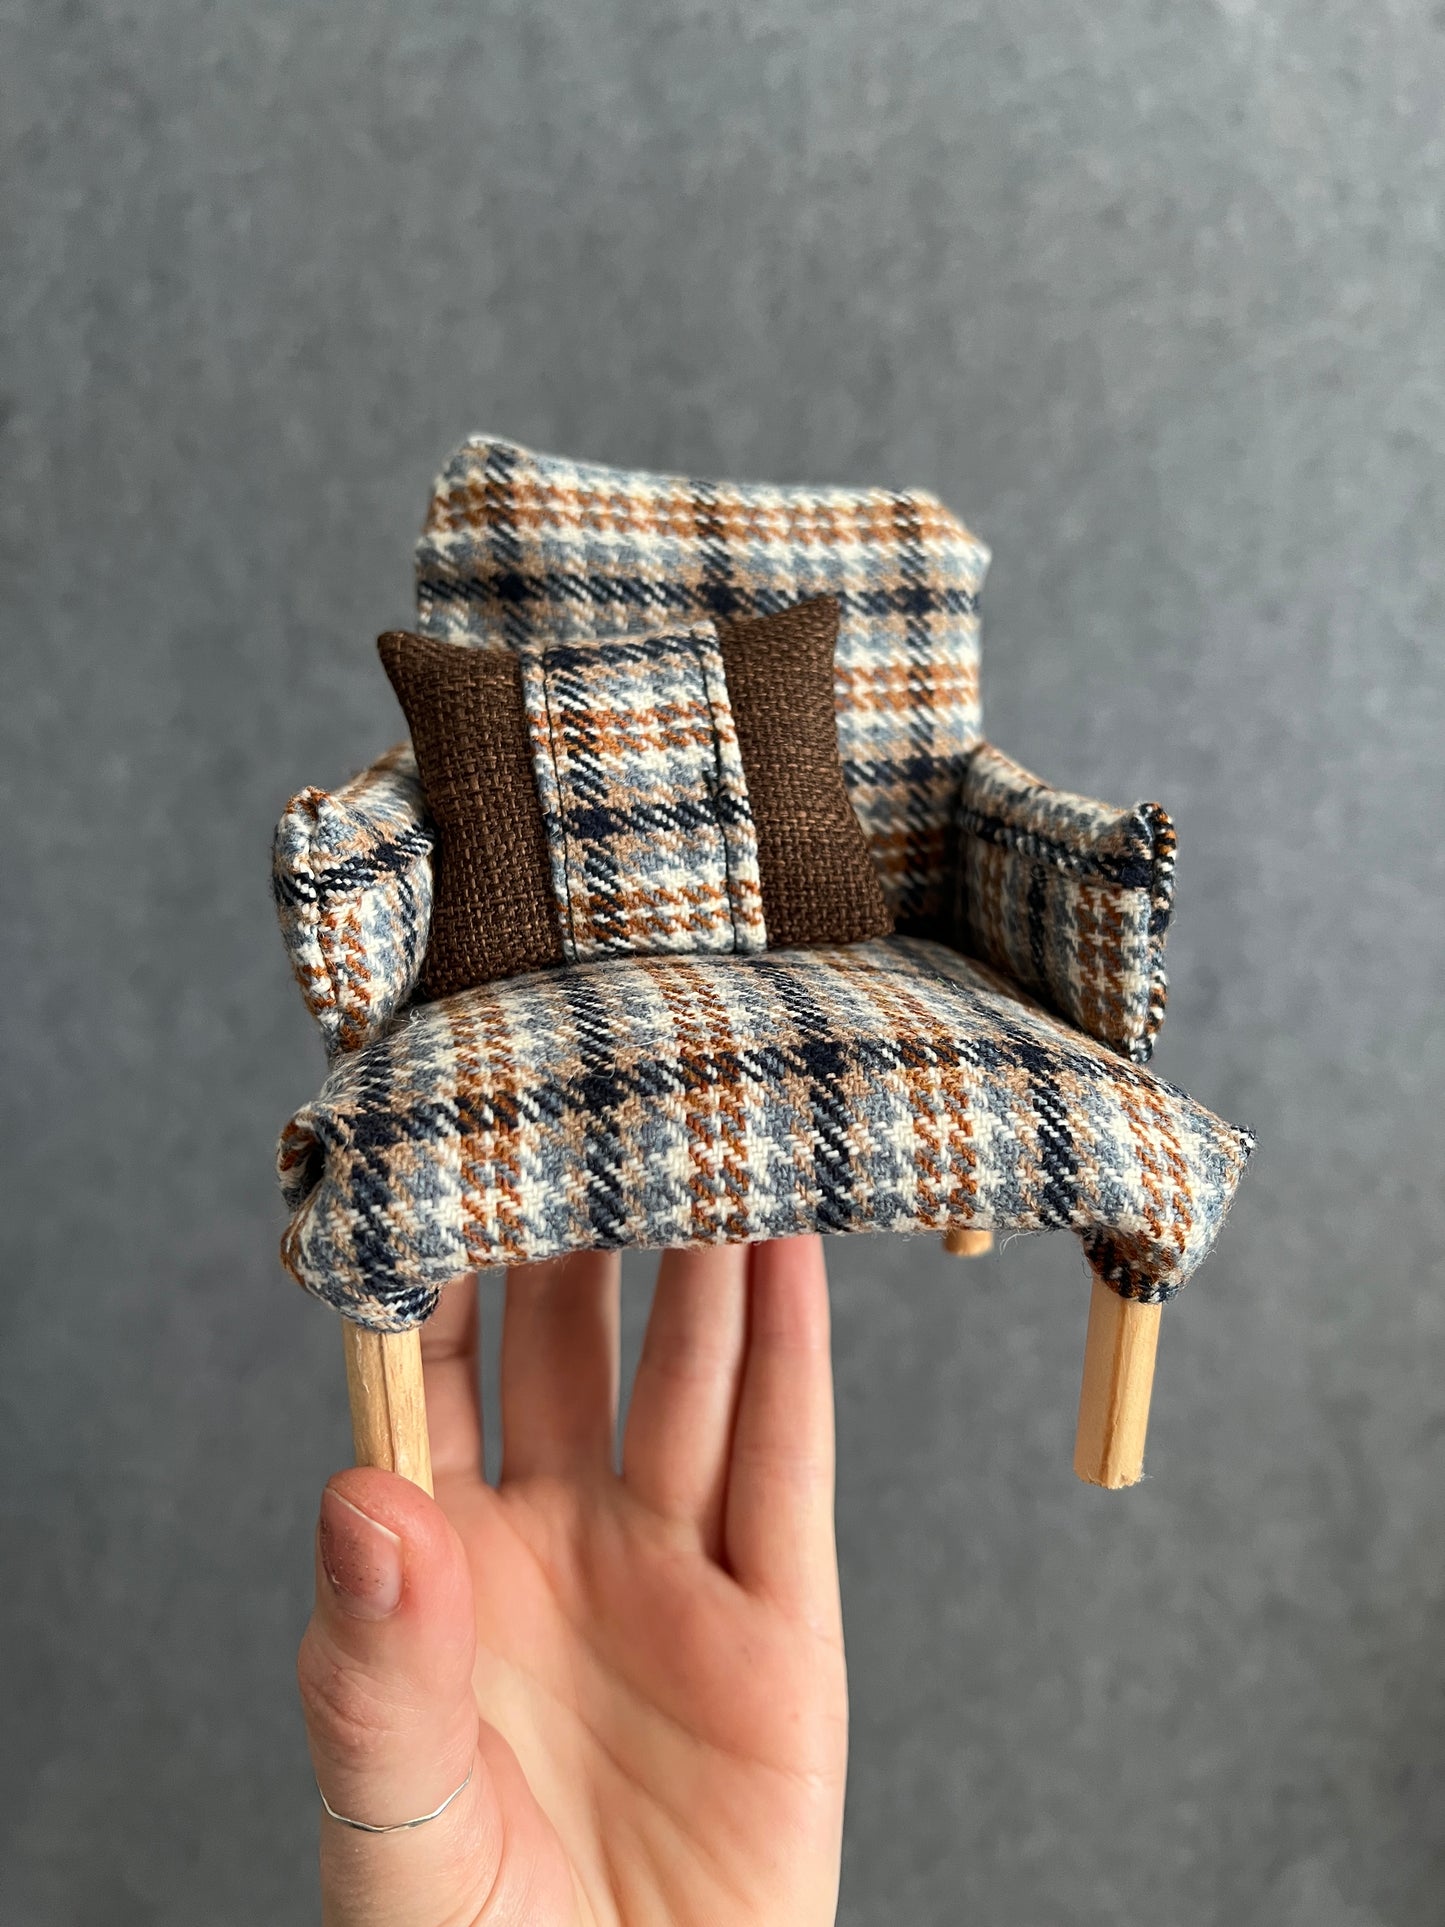 barbie chair brown plaid, held up for scale